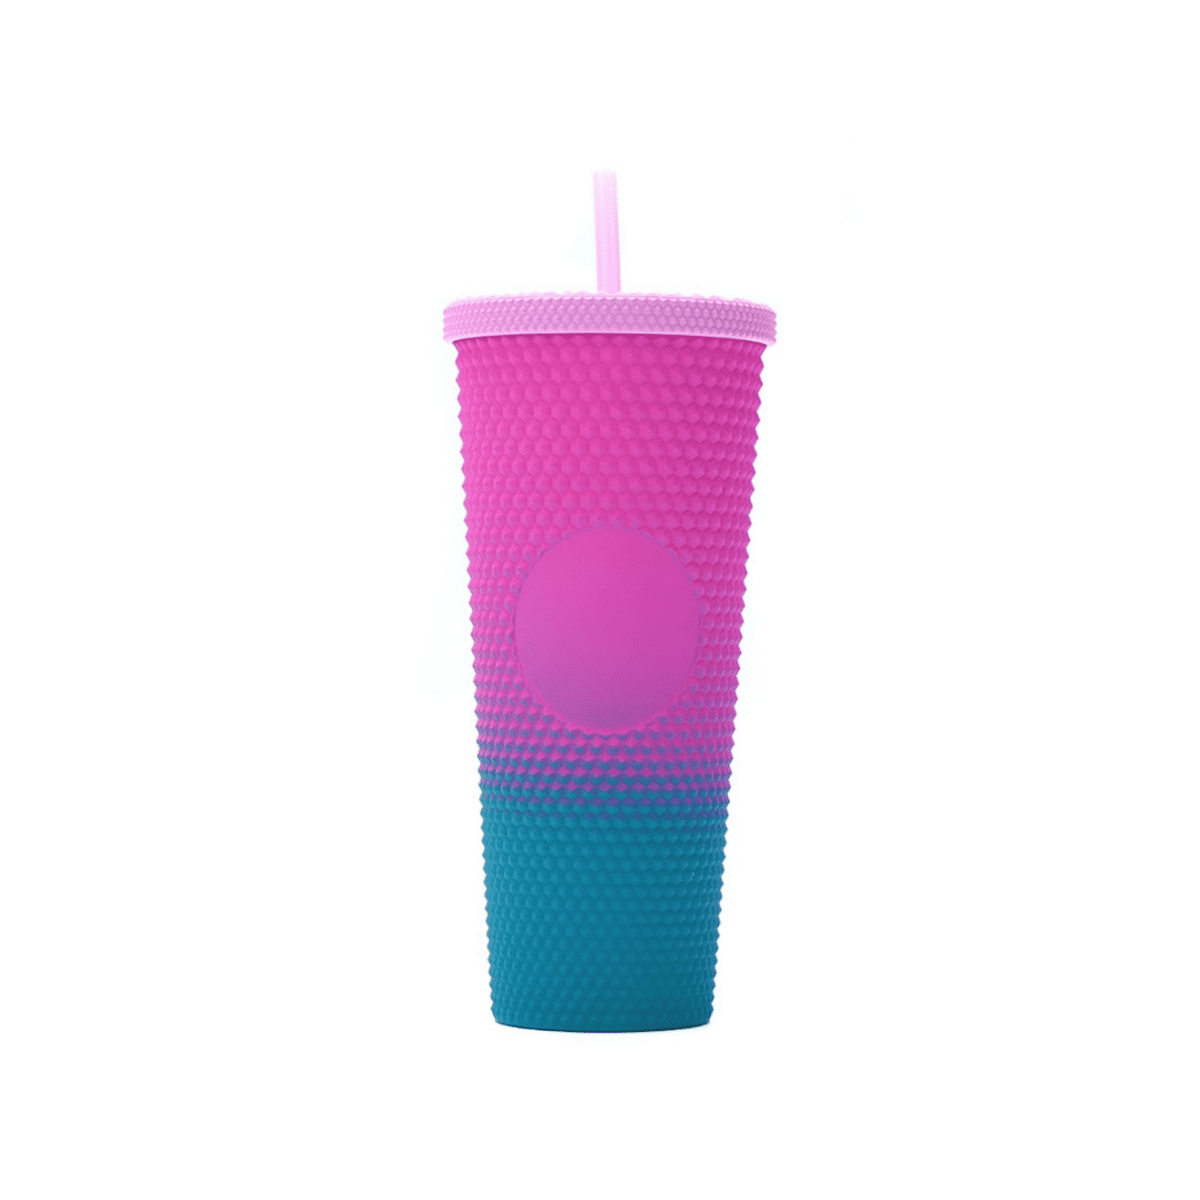 Afunbaby Water Tumbler, 24 oz Glitter Rhombus Pattern Water Cup, Reusable Iced Coffee Cup, Women's, Size: One size, White